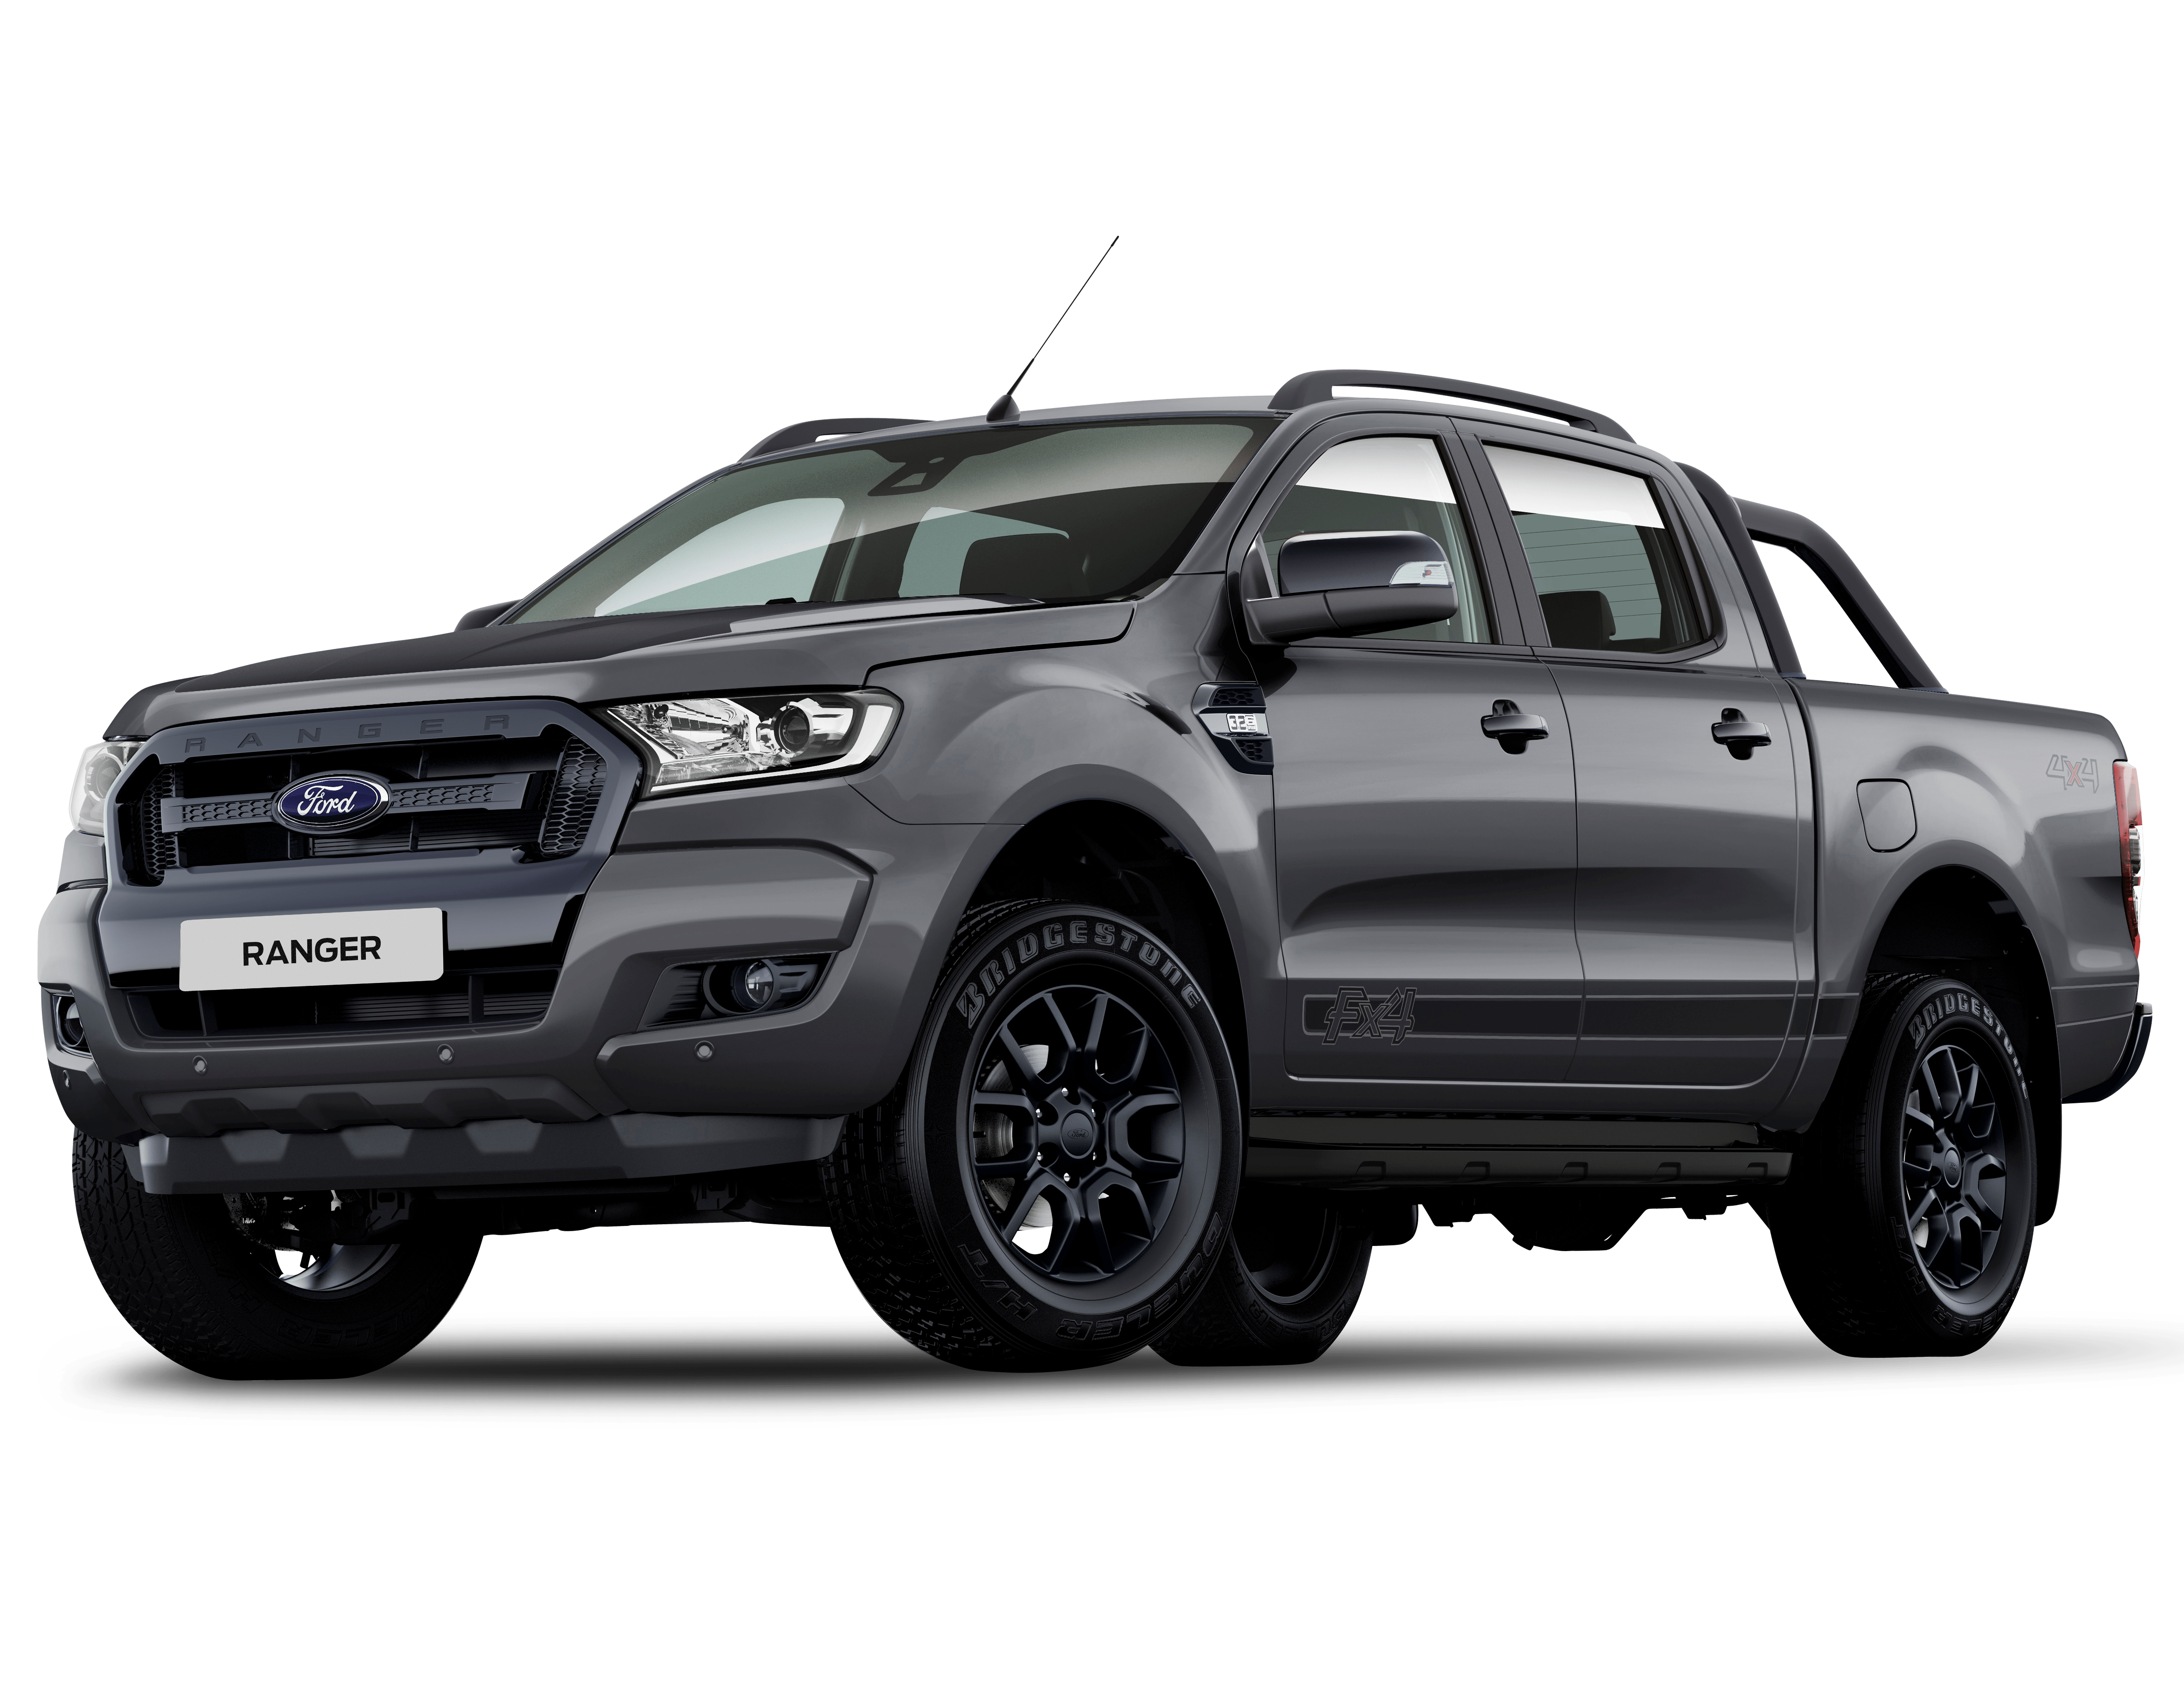 Ford Ranger Reviews | carsguide